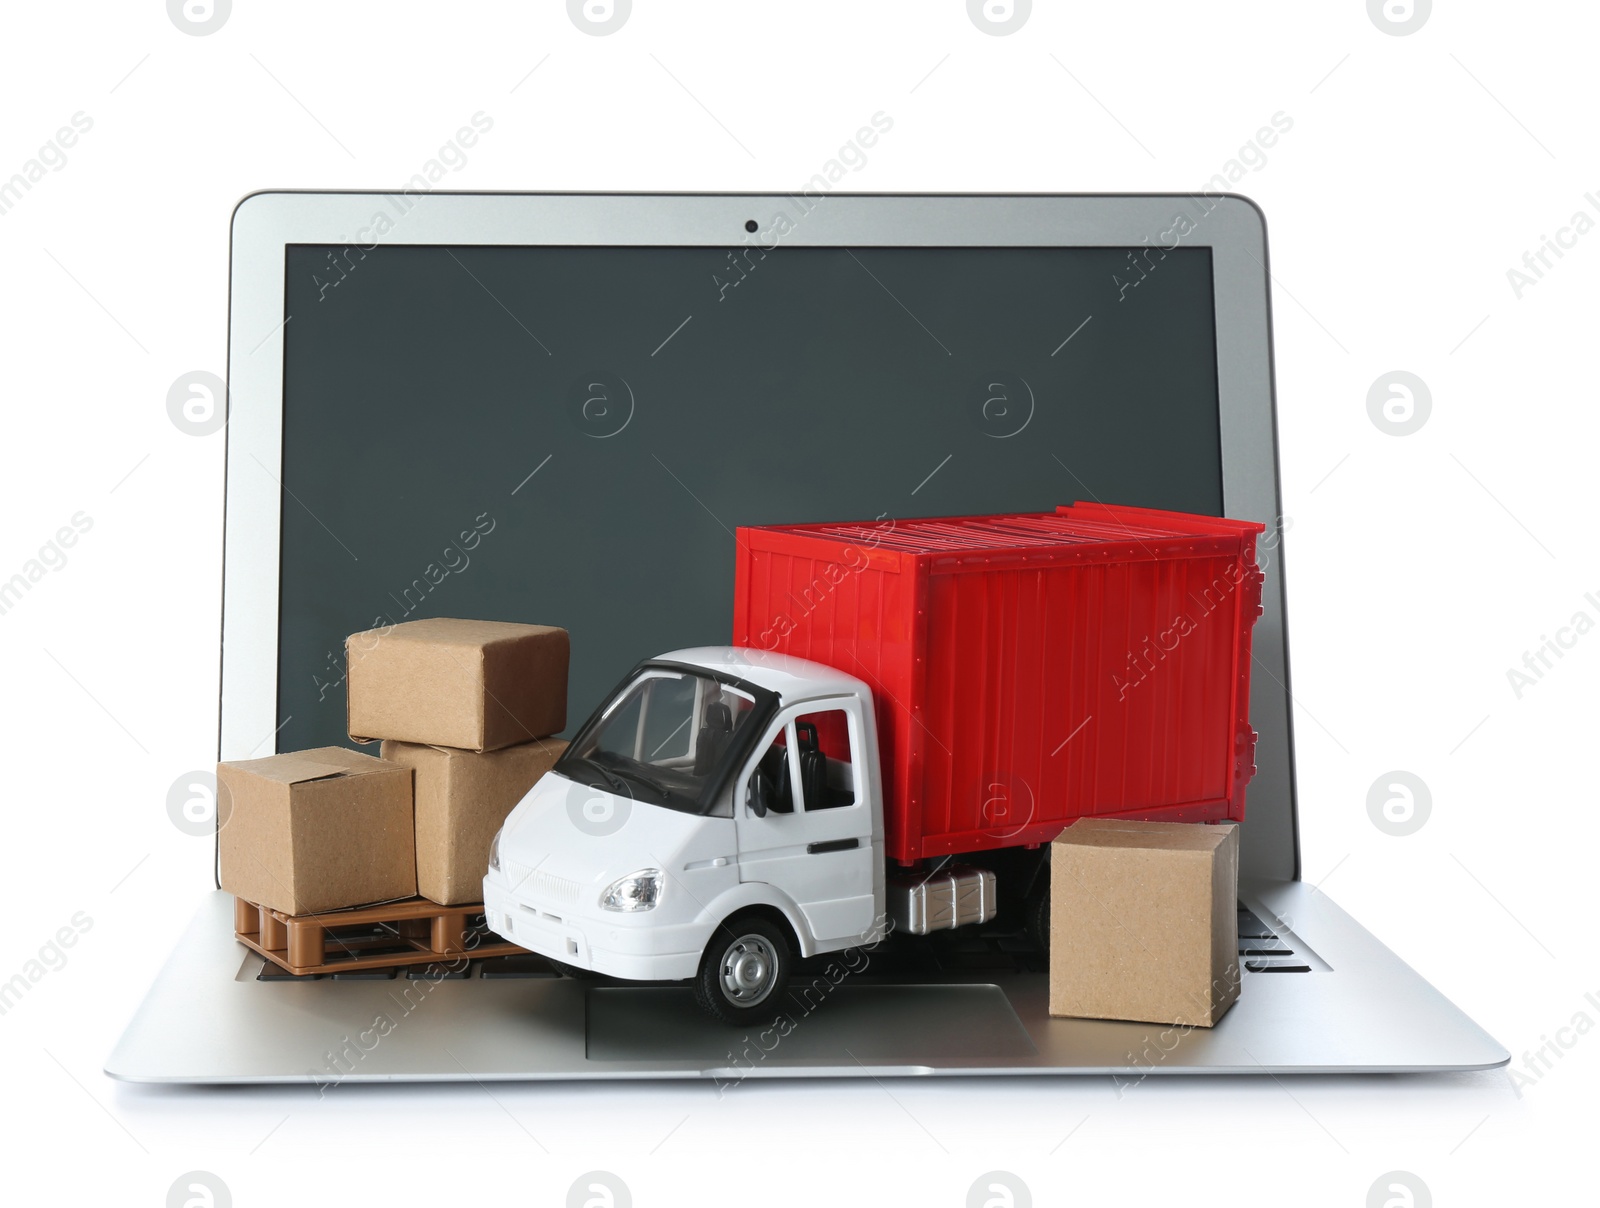 Photo of Laptop, truck model and carton boxes on white background. Courier service